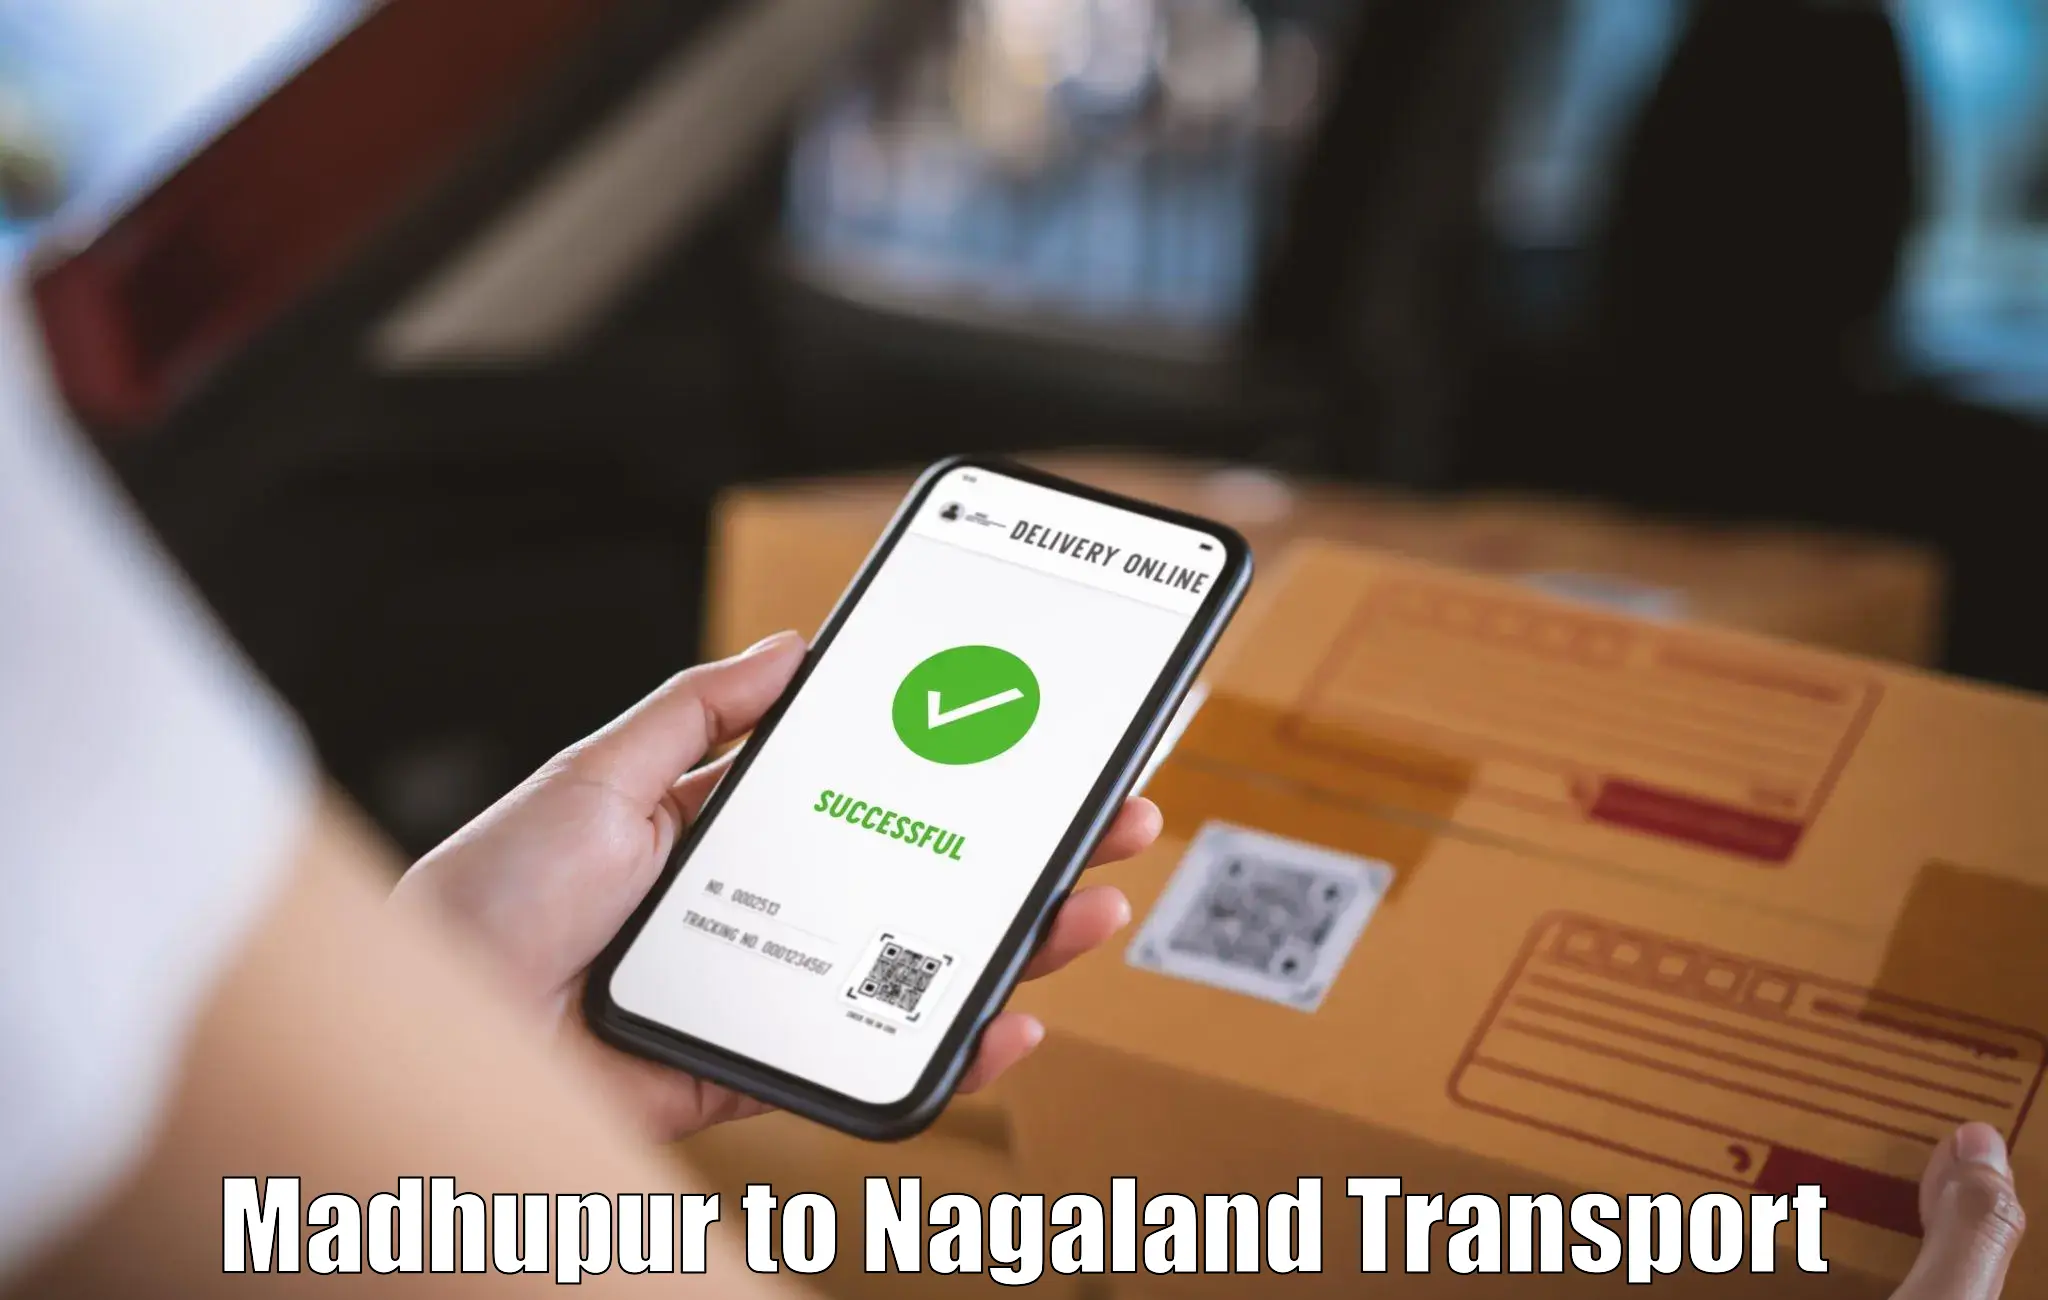 Domestic goods transportation services Madhupur to Nagaland